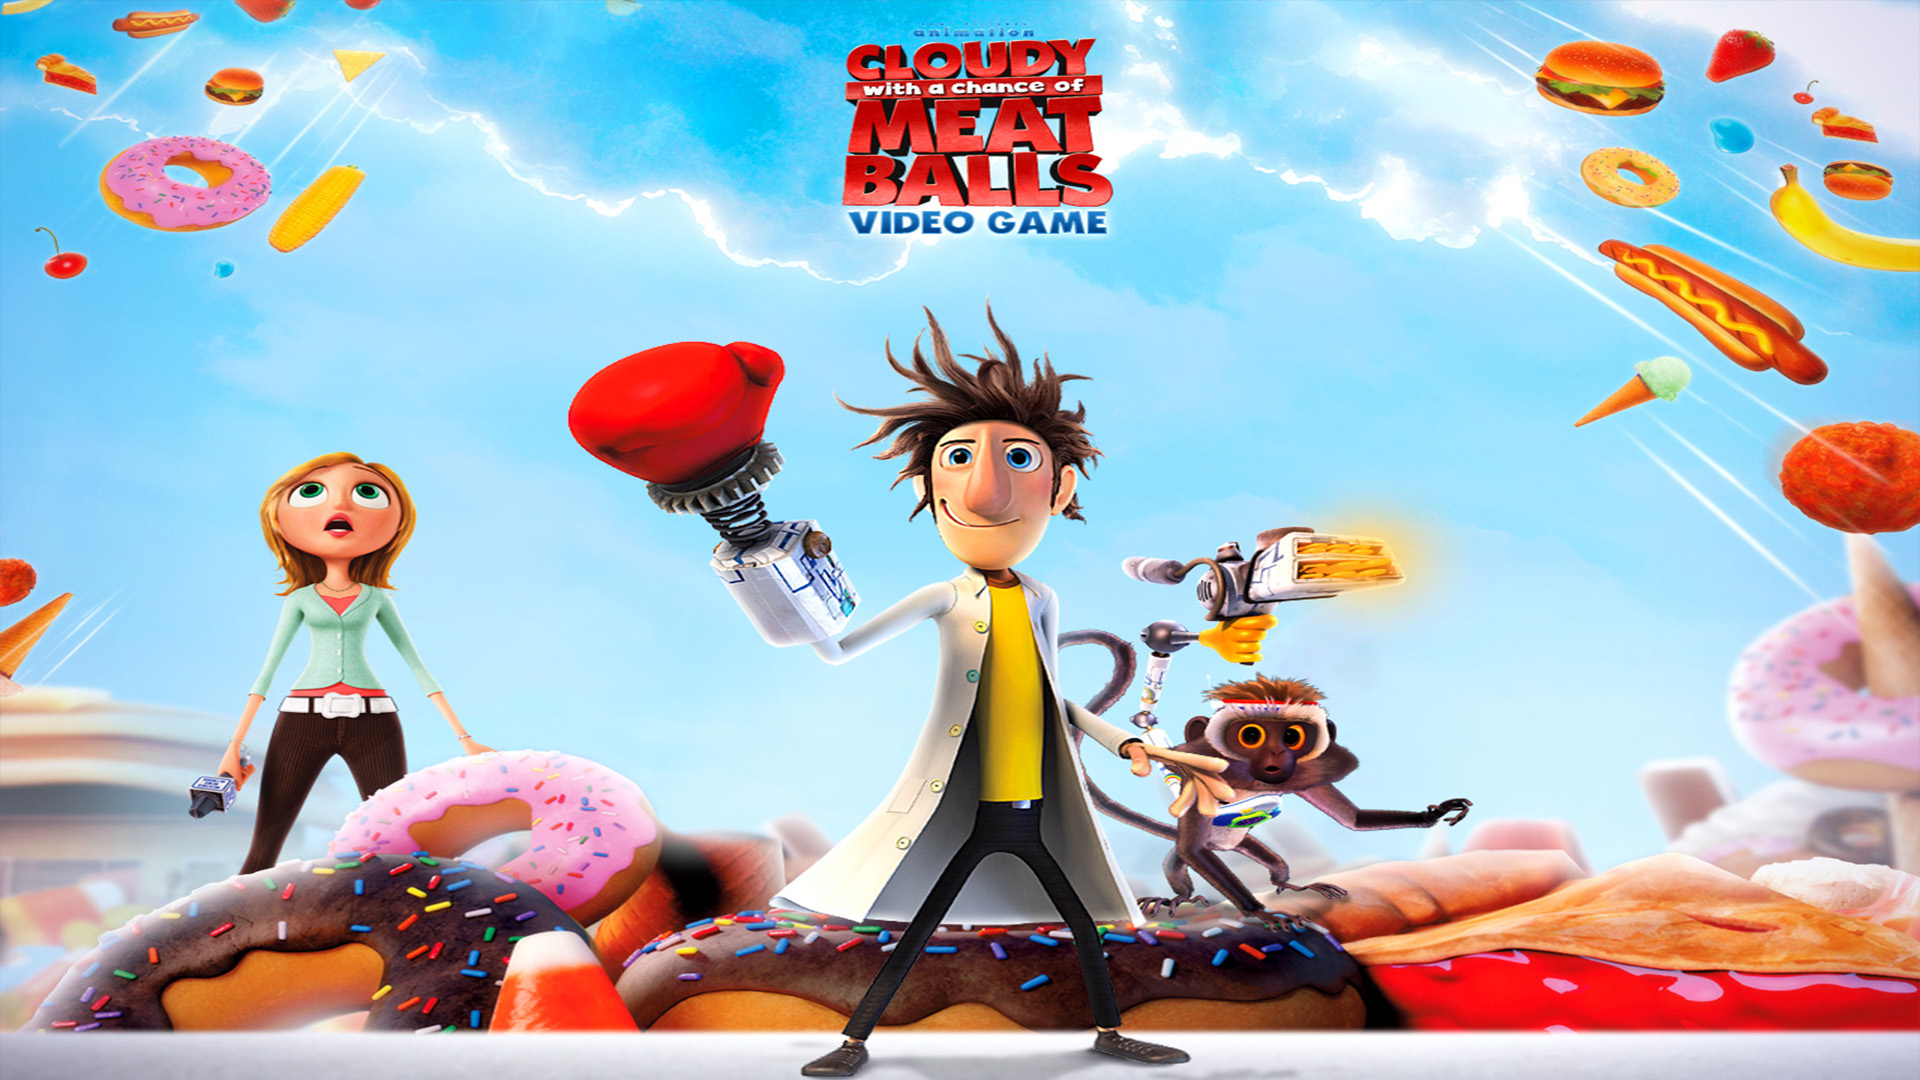 video game, cloudy with a chance of meatballs